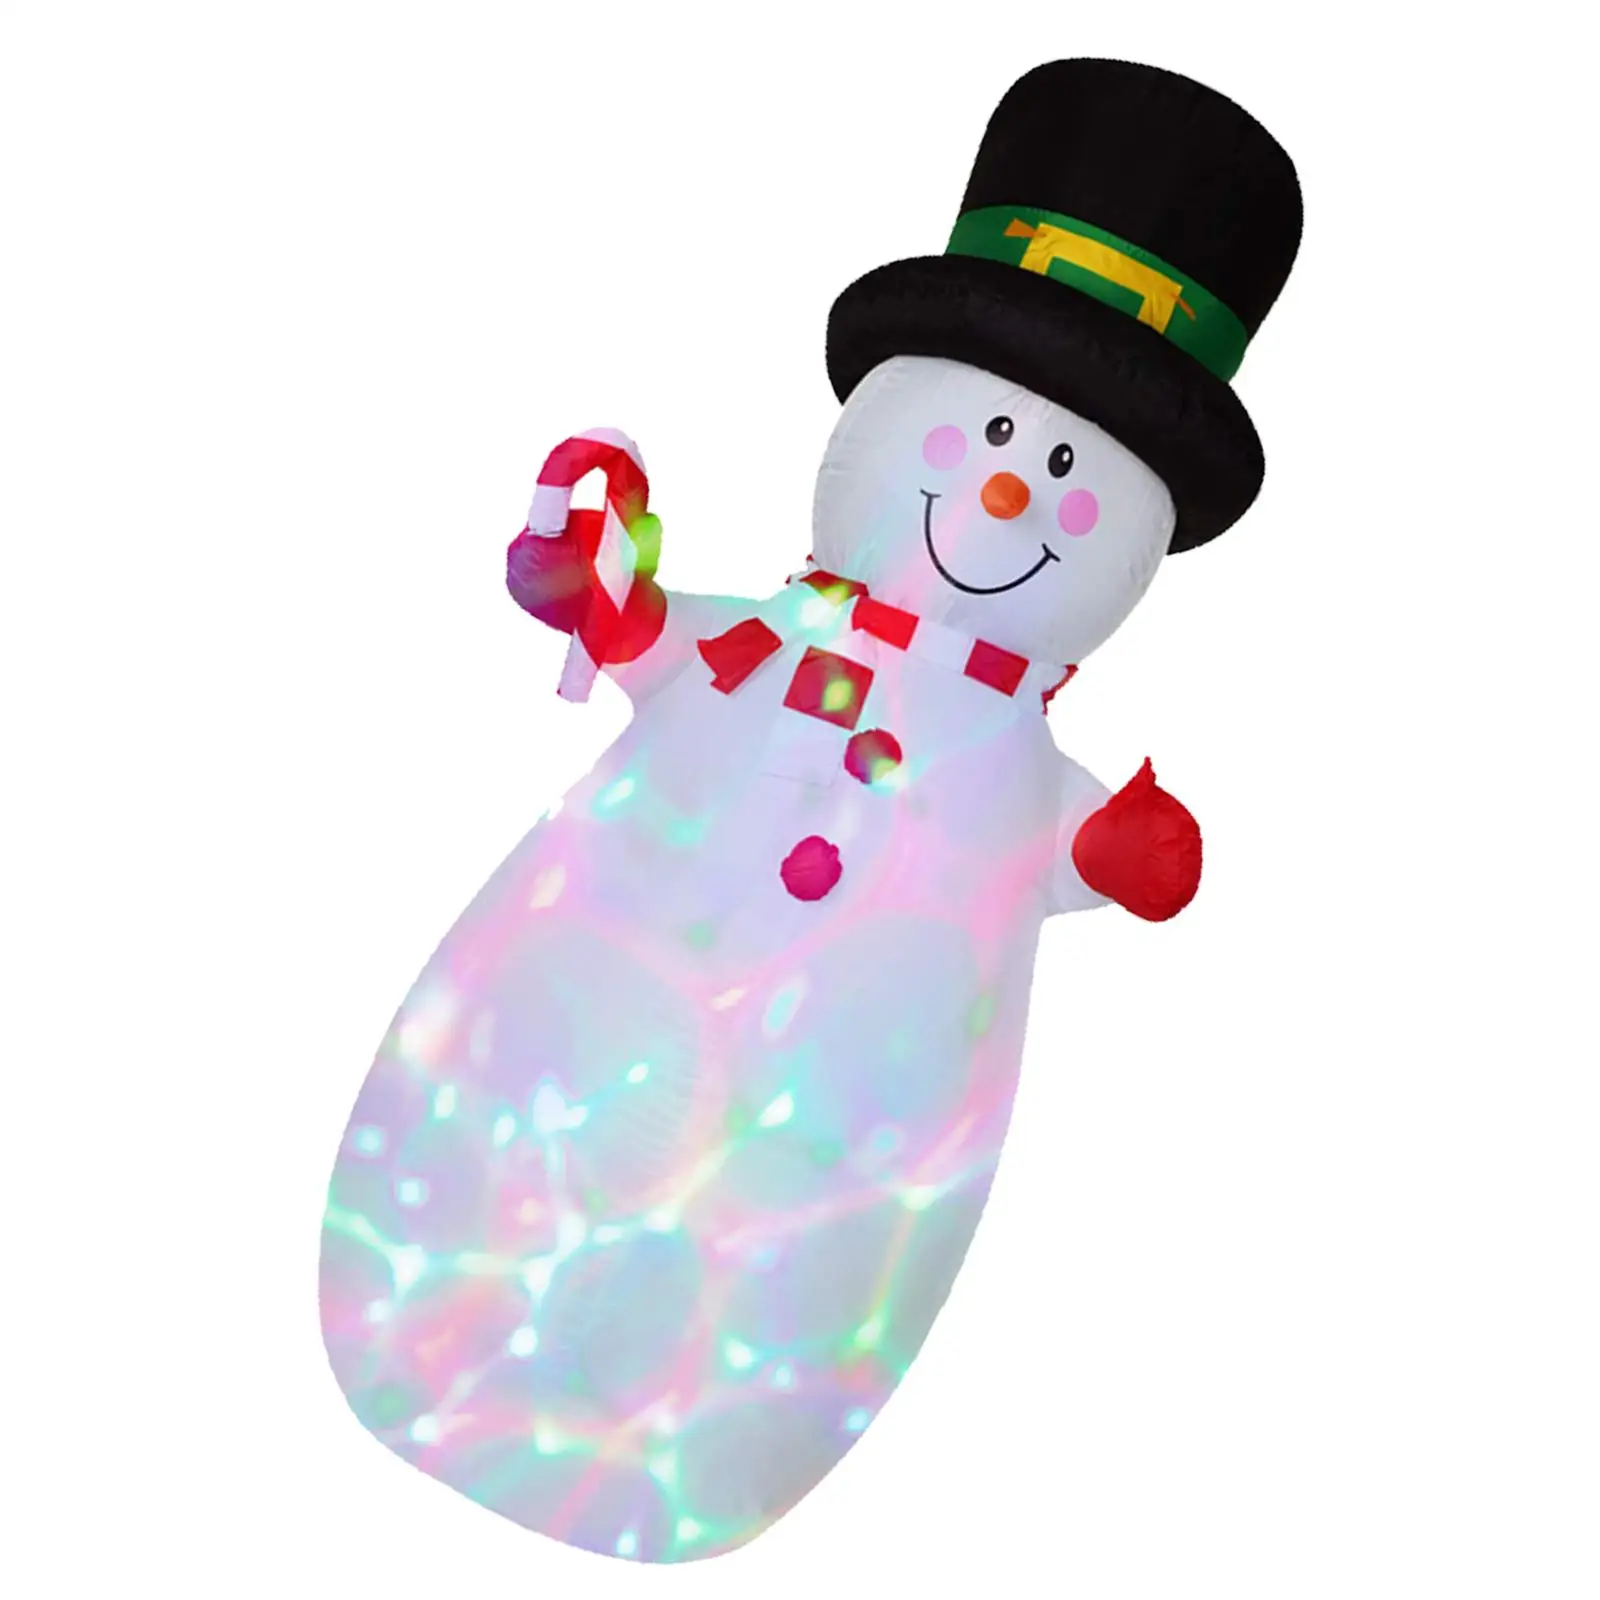 1.8 Meters Xmas Inflatable Snowman with Lights Holiday Inflatable Snowman Ornament for Party Lawn Home Garden Patio